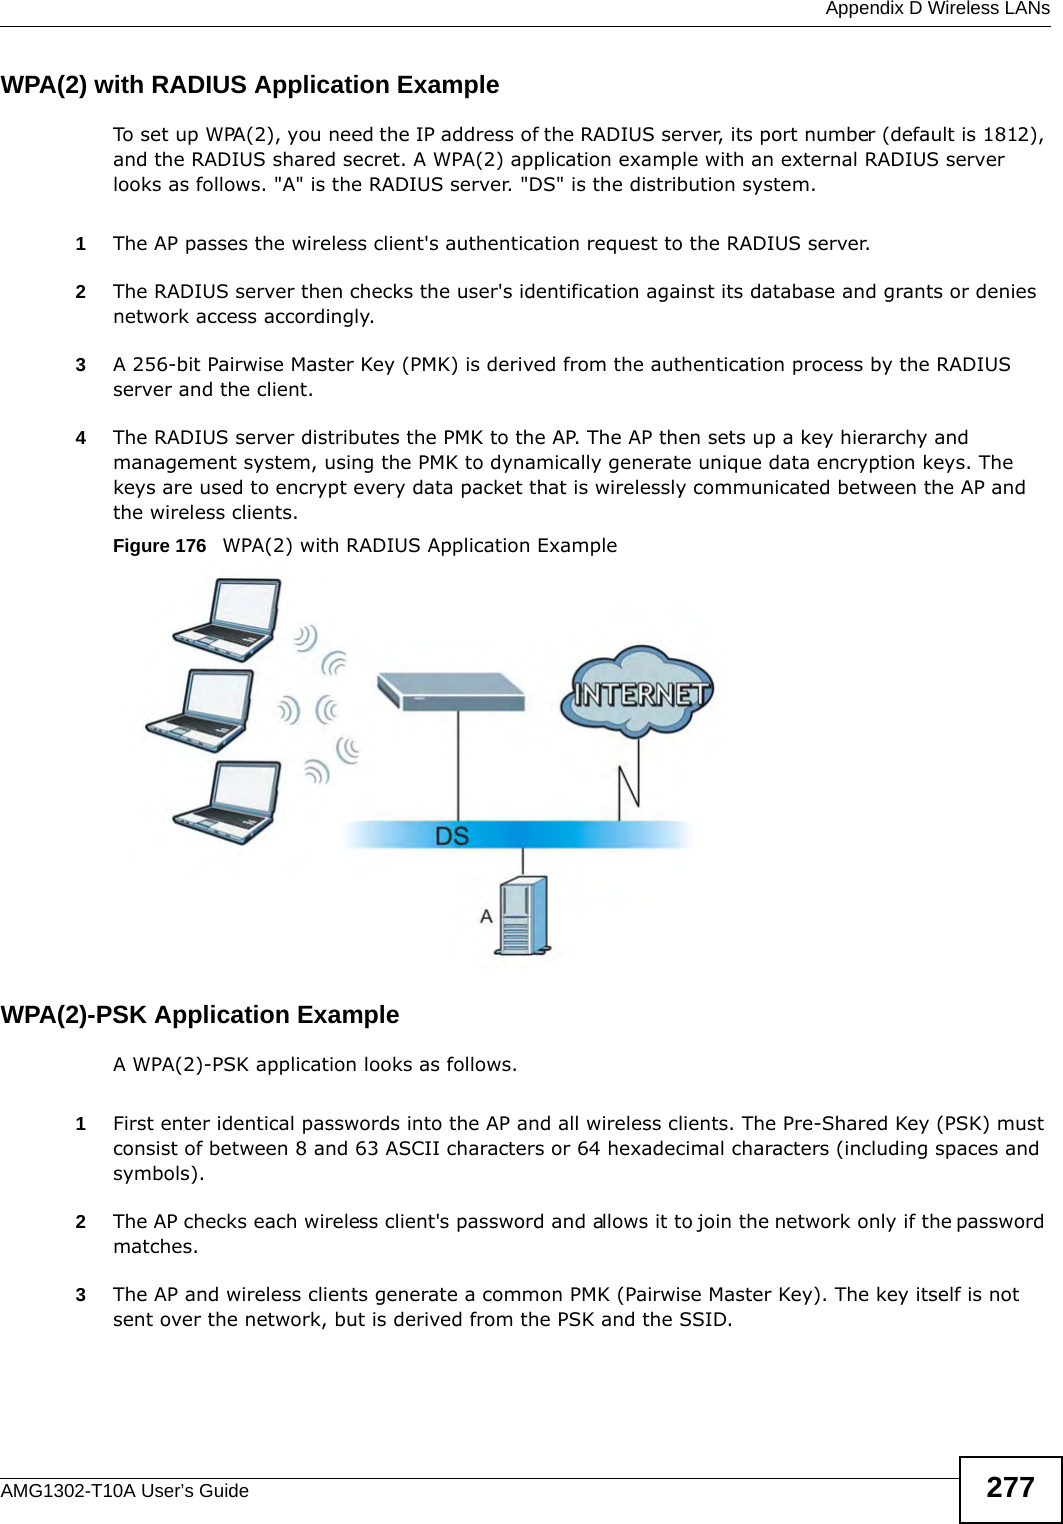  Appendix D Wireless LANsAMG1302-T10A User’s Guide 277WPA(2) with RADIUS Application ExampleTo set up WPA(2), you need the IP address of the RADIUS server, its port number (default is 1812), and the RADIUS shared secret. A WPA(2) application example with an external RADIUS server looks as follows. &quot;A&quot; is the RADIUS server. &quot;DS&quot; is the distribution system.1The AP passes the wireless client&apos;s authentication request to the RADIUS server.2The RADIUS server then checks the user&apos;s identification against its database and grants or denies network access accordingly.3A 256-bit Pairwise Master Key (PMK) is derived from the authentication process by the RADIUS server and the client.4The RADIUS server distributes the PMK to the AP. The AP then sets up a key hierarchy and management system, using the PMK to dynamically generate unique data encryption keys. The keys are used to encrypt every data packet that is wirelessly communicated between the AP and the wireless clients.Figure 176   WPA(2) with RADIUS Application ExampleWPA(2)-PSK Application ExampleA WPA(2)-PSK application looks as follows.1First enter identical passwords into the AP and all wireless clients. The Pre-Shared Key (PSK) must consist of between 8 and 63 ASCII characters or 64 hexadecimal characters (including spaces and symbols).2The AP checks each wireless client&apos;s password and allows it to join the network only if the password matches.3The AP and wireless clients generate a common PMK (Pairwise Master Key). The key itself is not sent over the network, but is derived from the PSK and the SSID. 